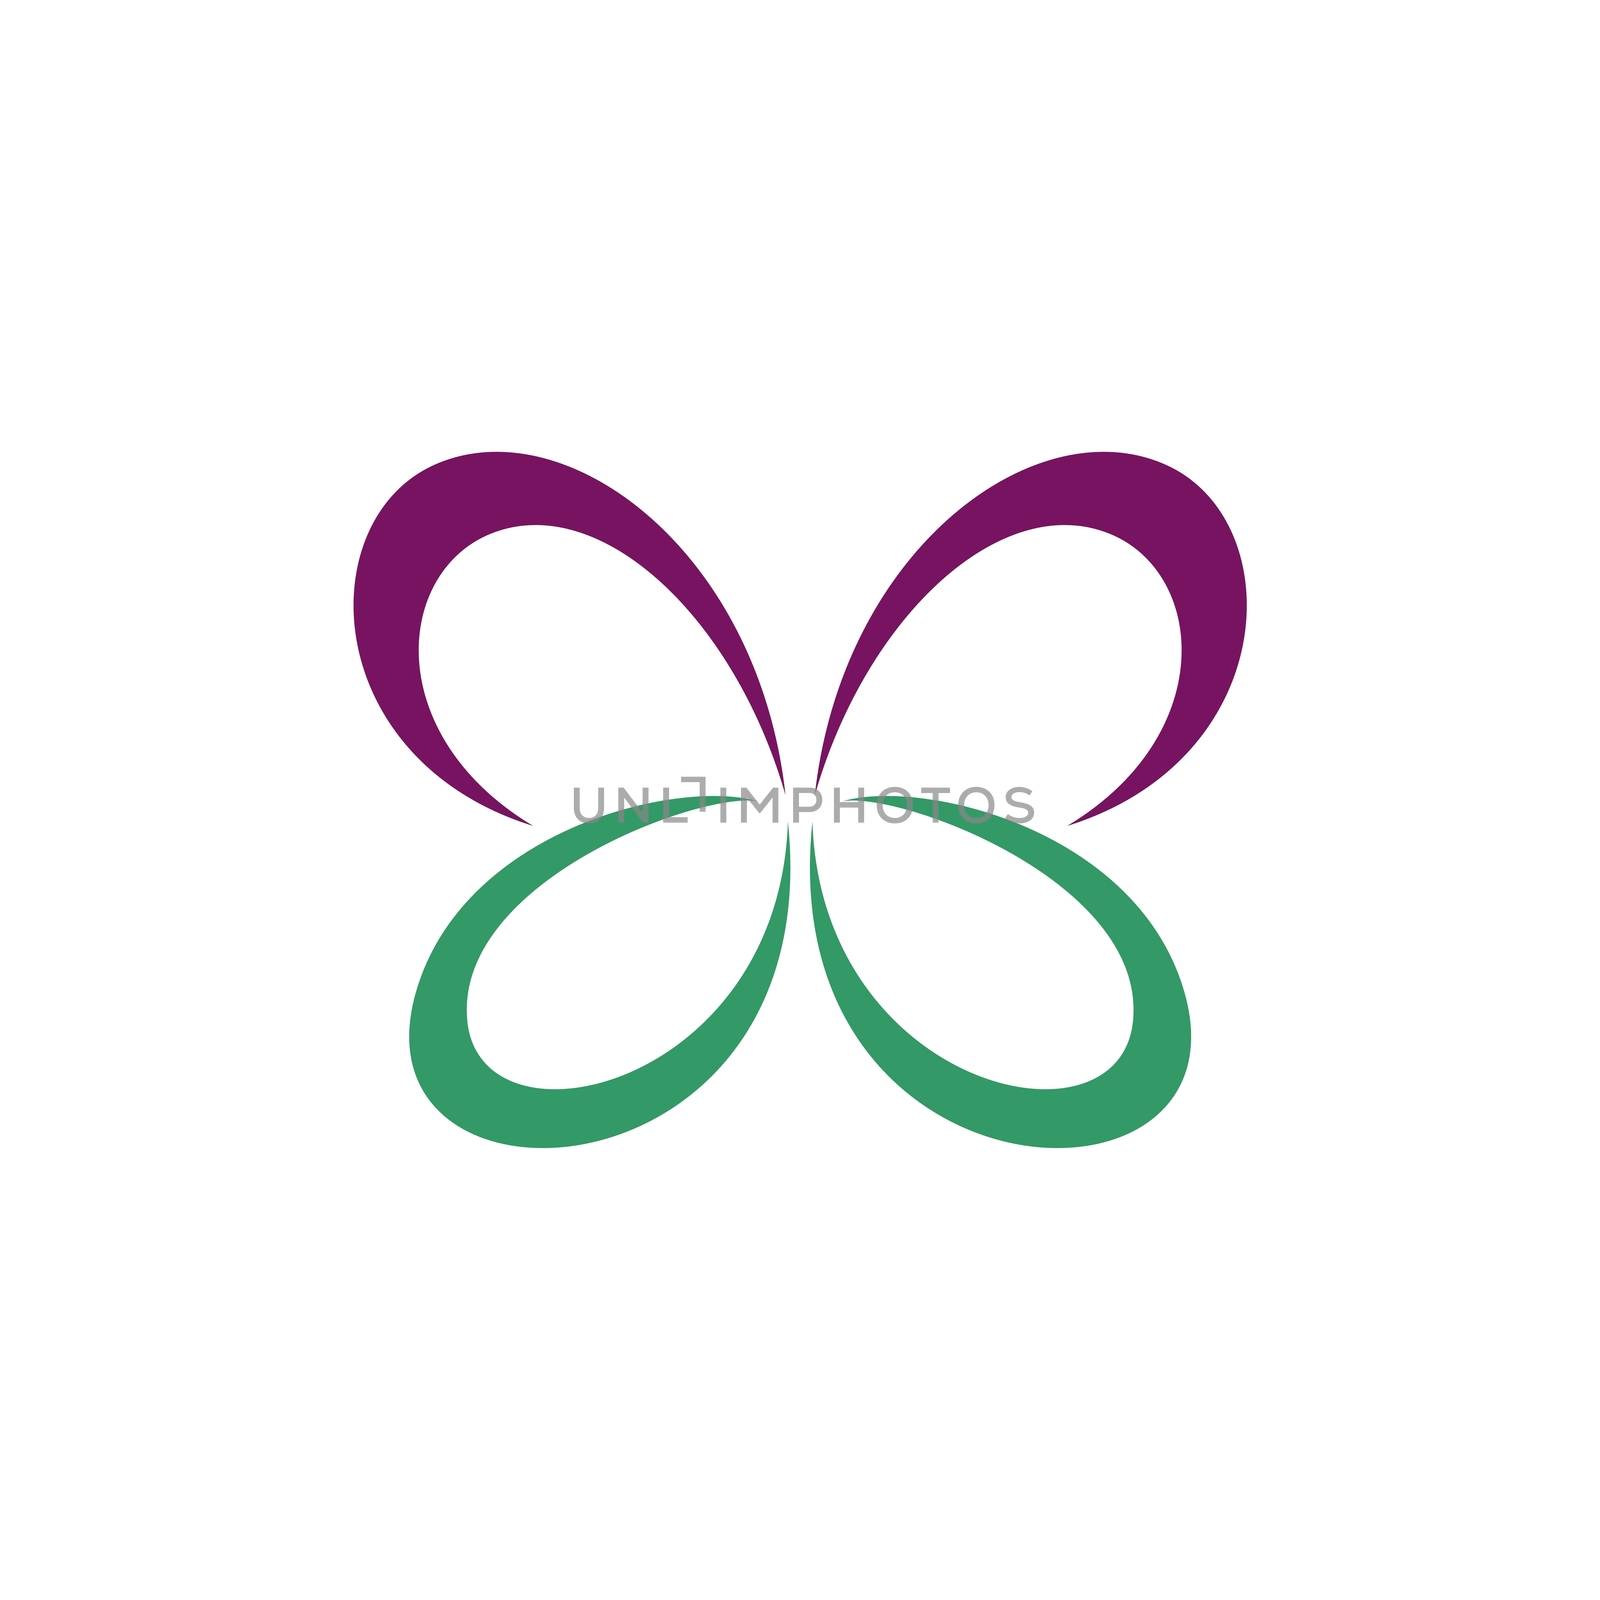 Abstract Butterfly Swoosh Logo Template Illustration Design Illustration Design. Vector EPS 10.